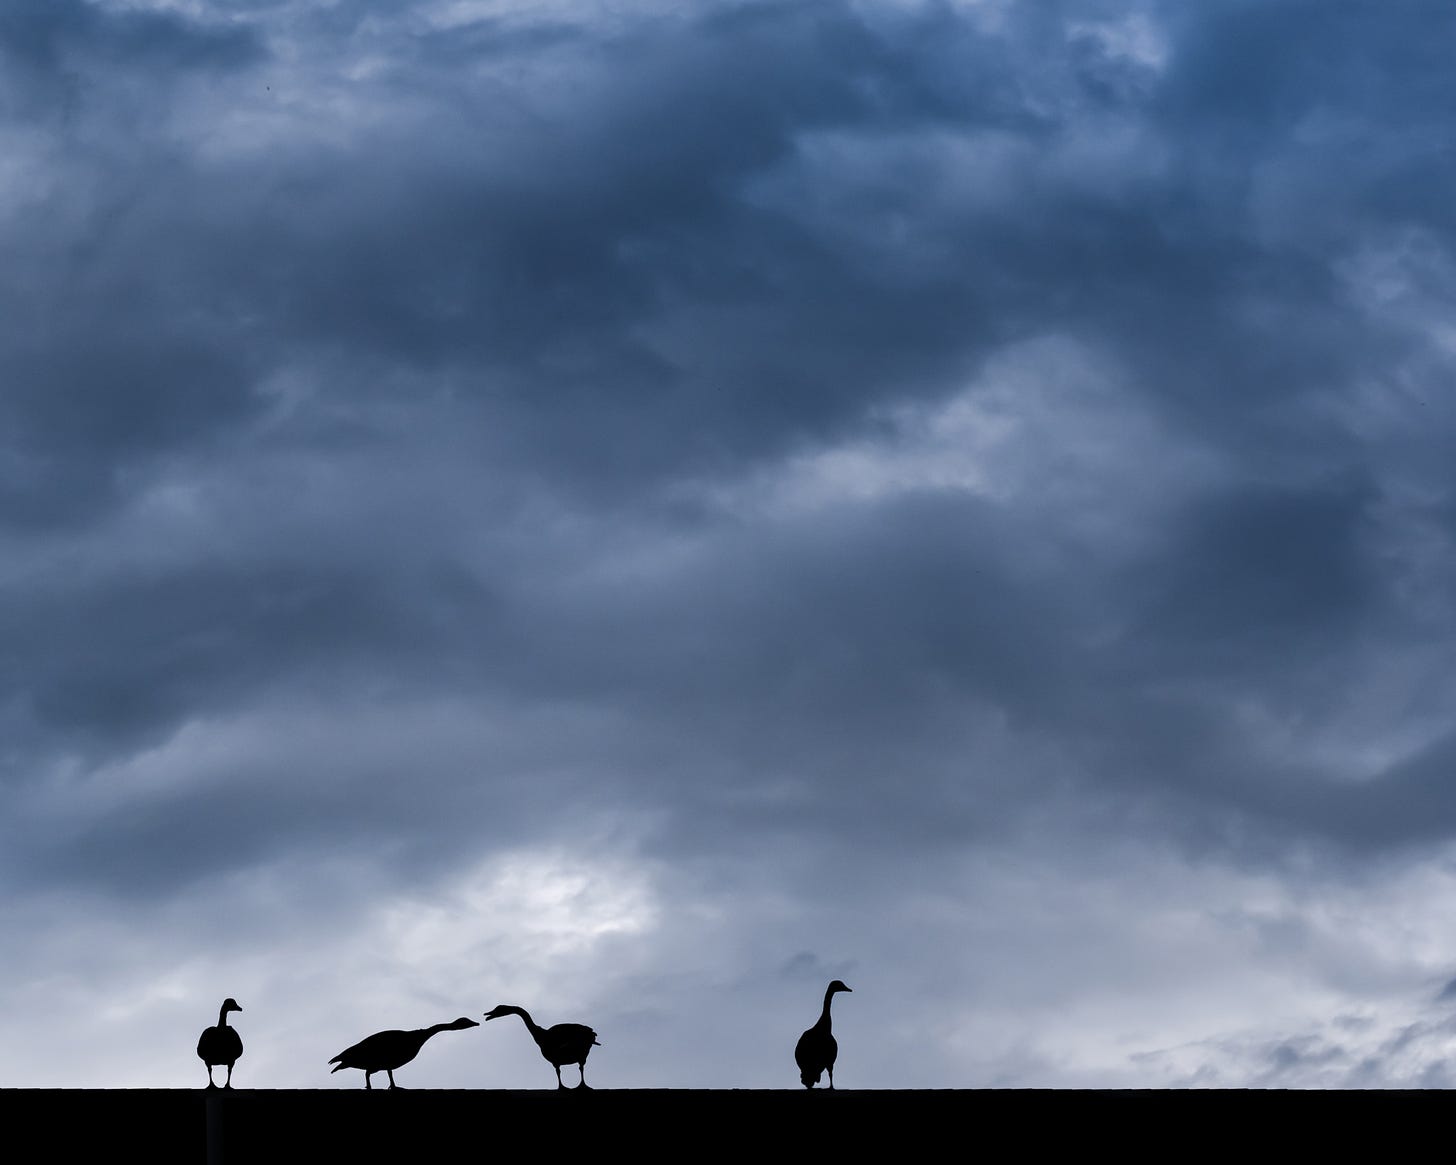 Four geese standing on a roof under cloudy skies. Two of the geese are interacting with each other and making conversational sounds.